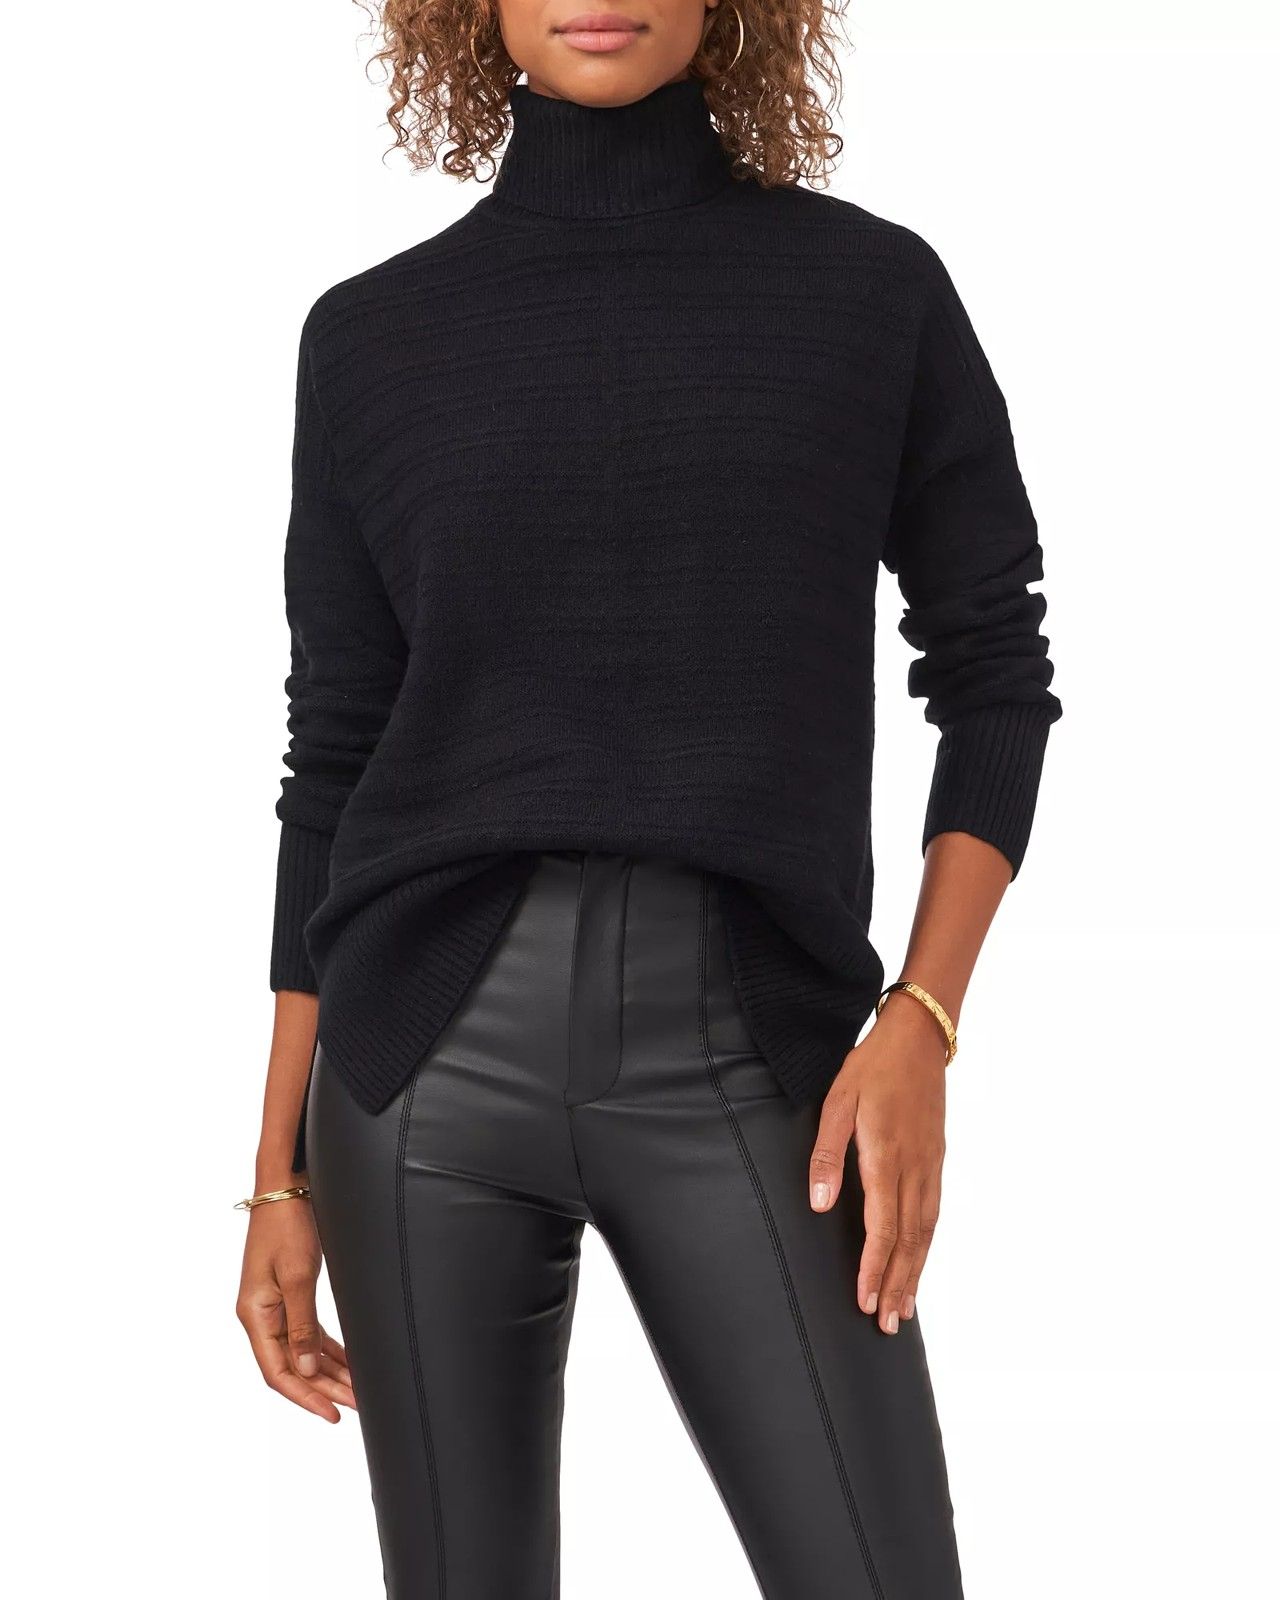 Vince Camuto Ribbed Turtleneck Sweater | Vince Camuto